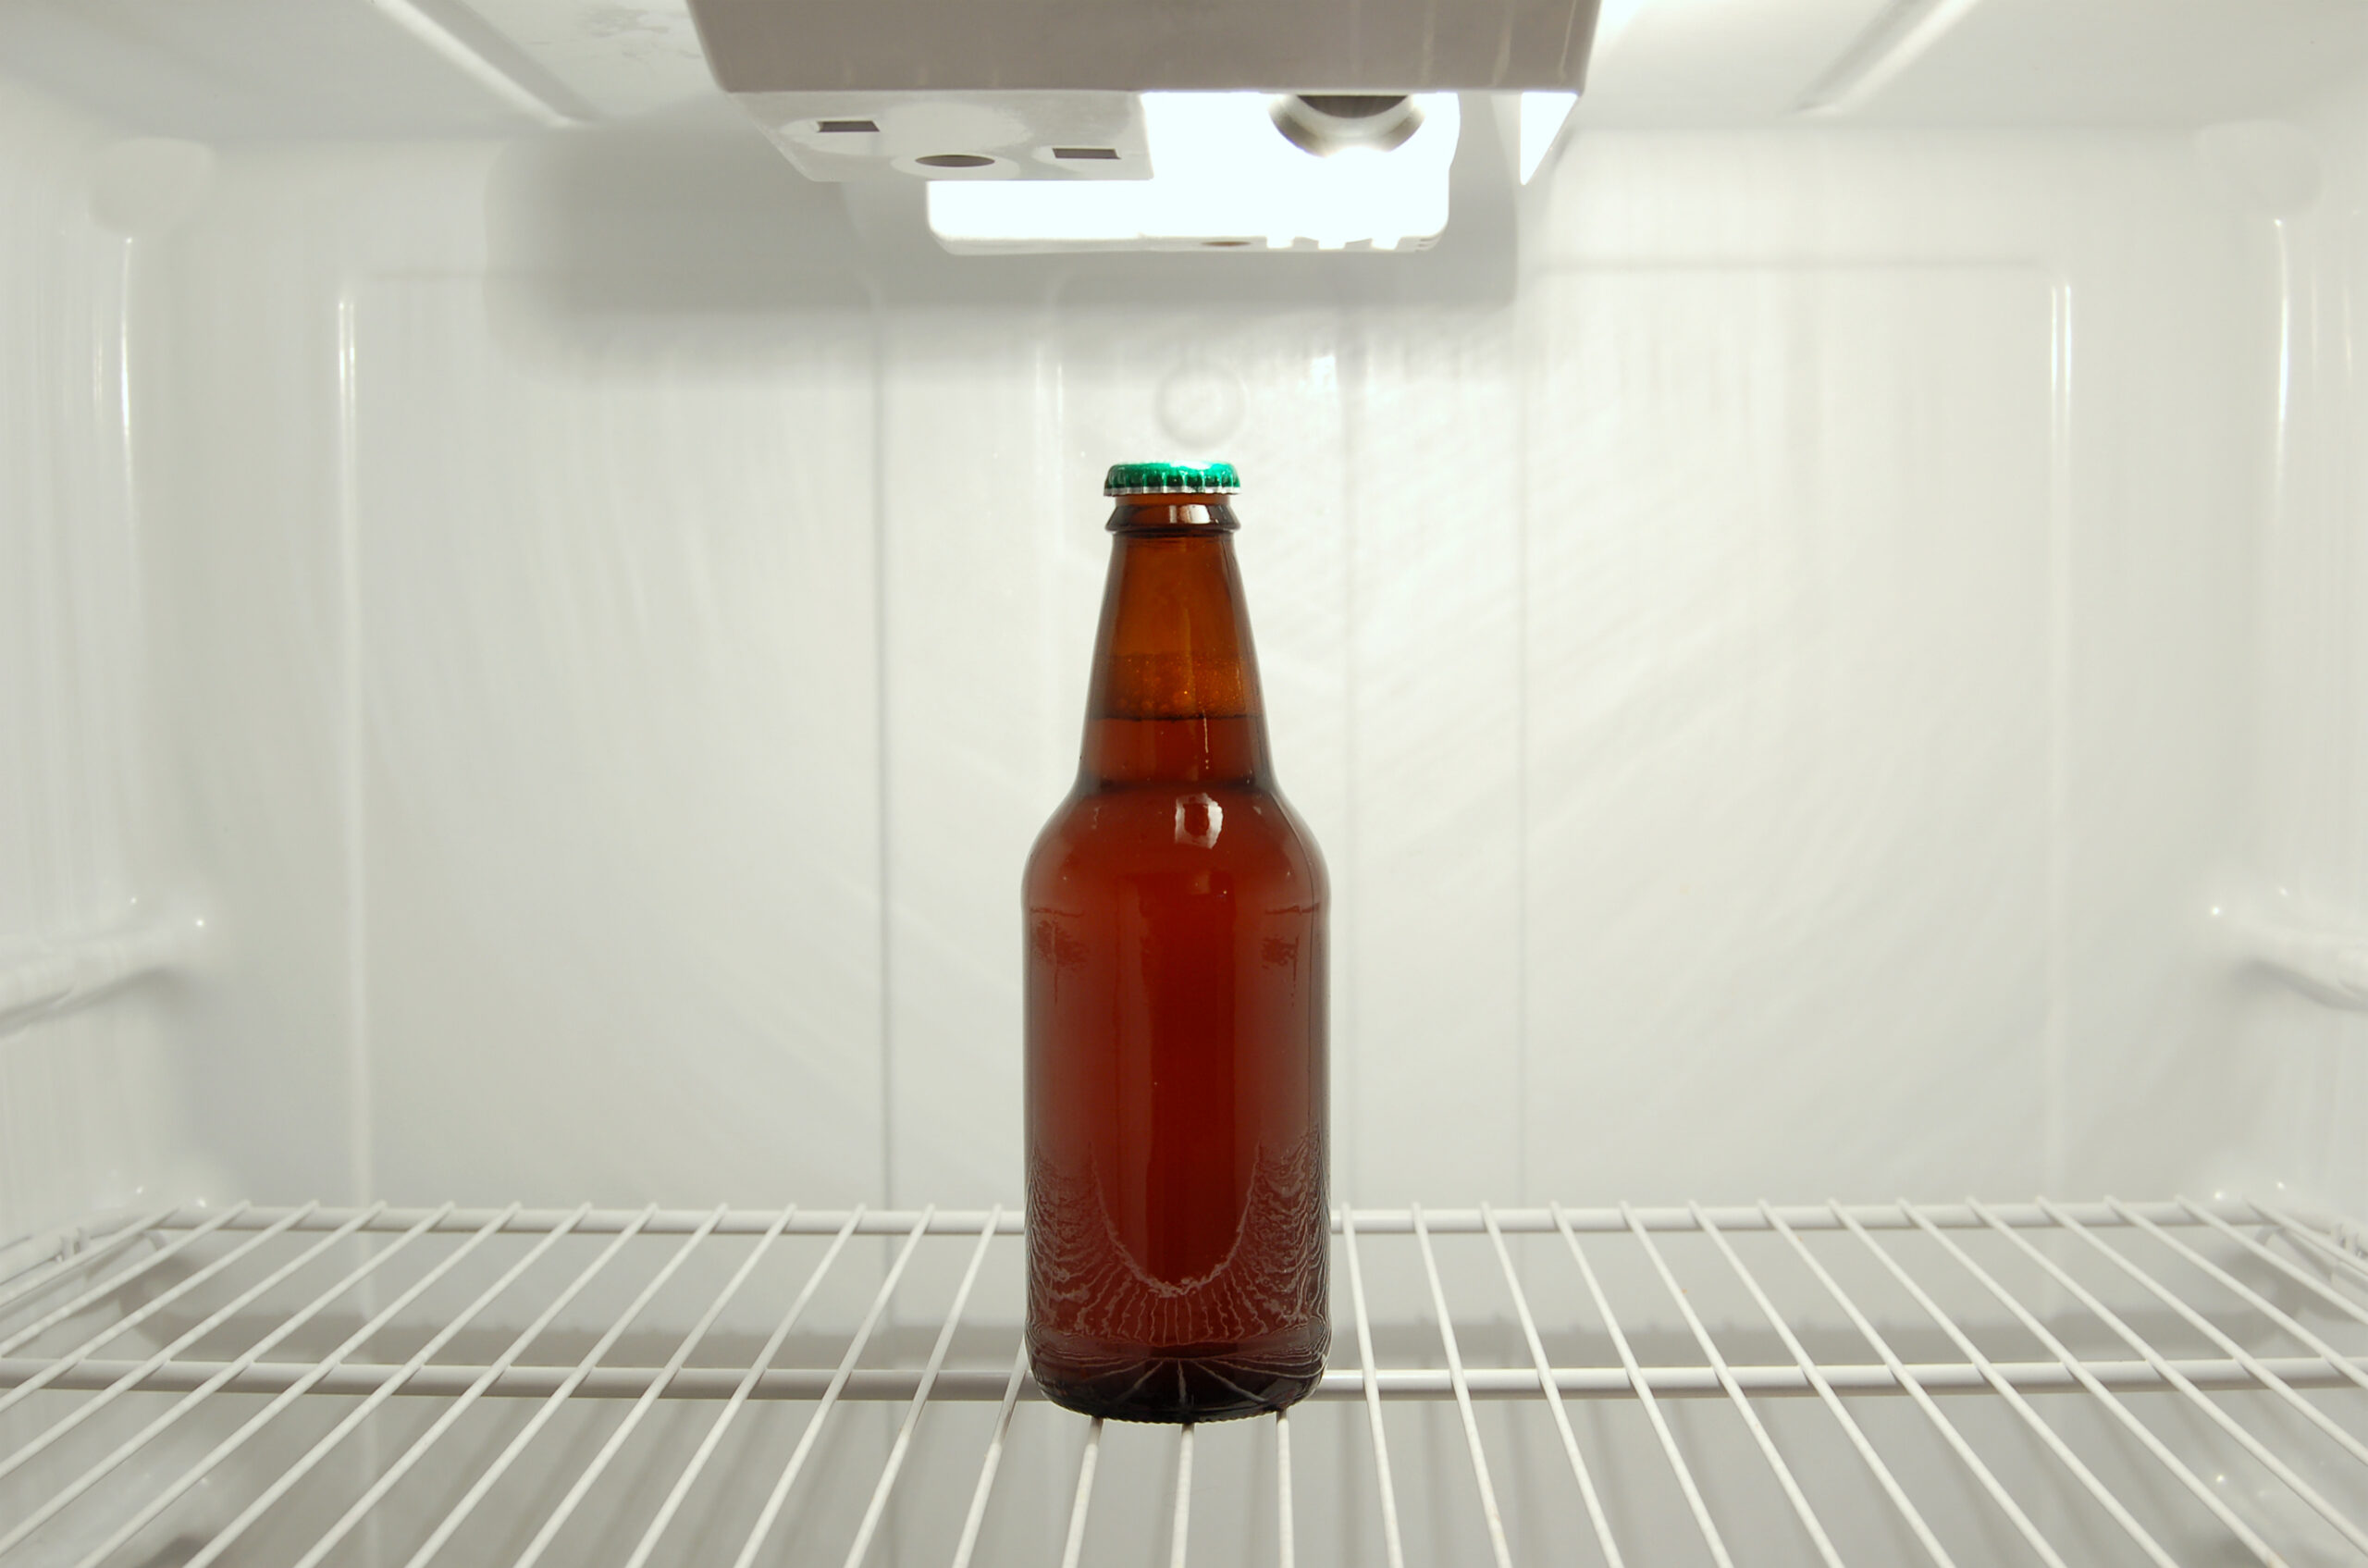 The last bottle of beer in the refrigerator